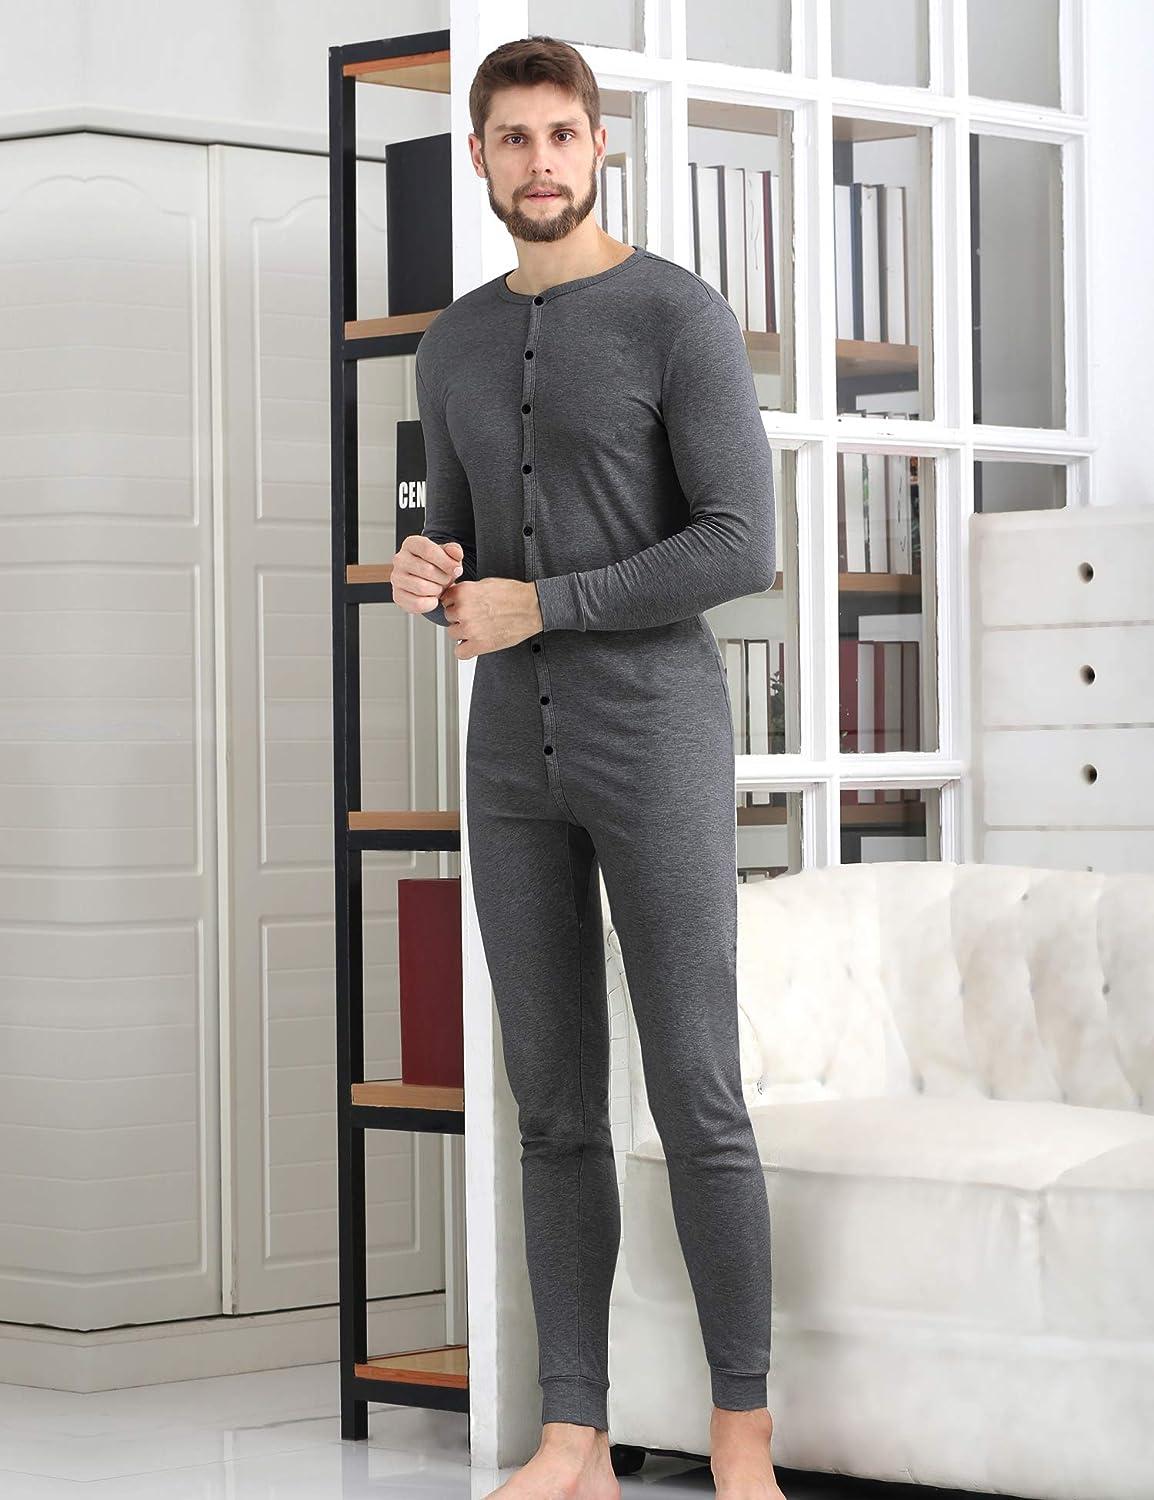 COLORFULLEAF Men's Cotton Thermal Underwear Union Suits Henley Onesies Base  Layer Dark Grey Large